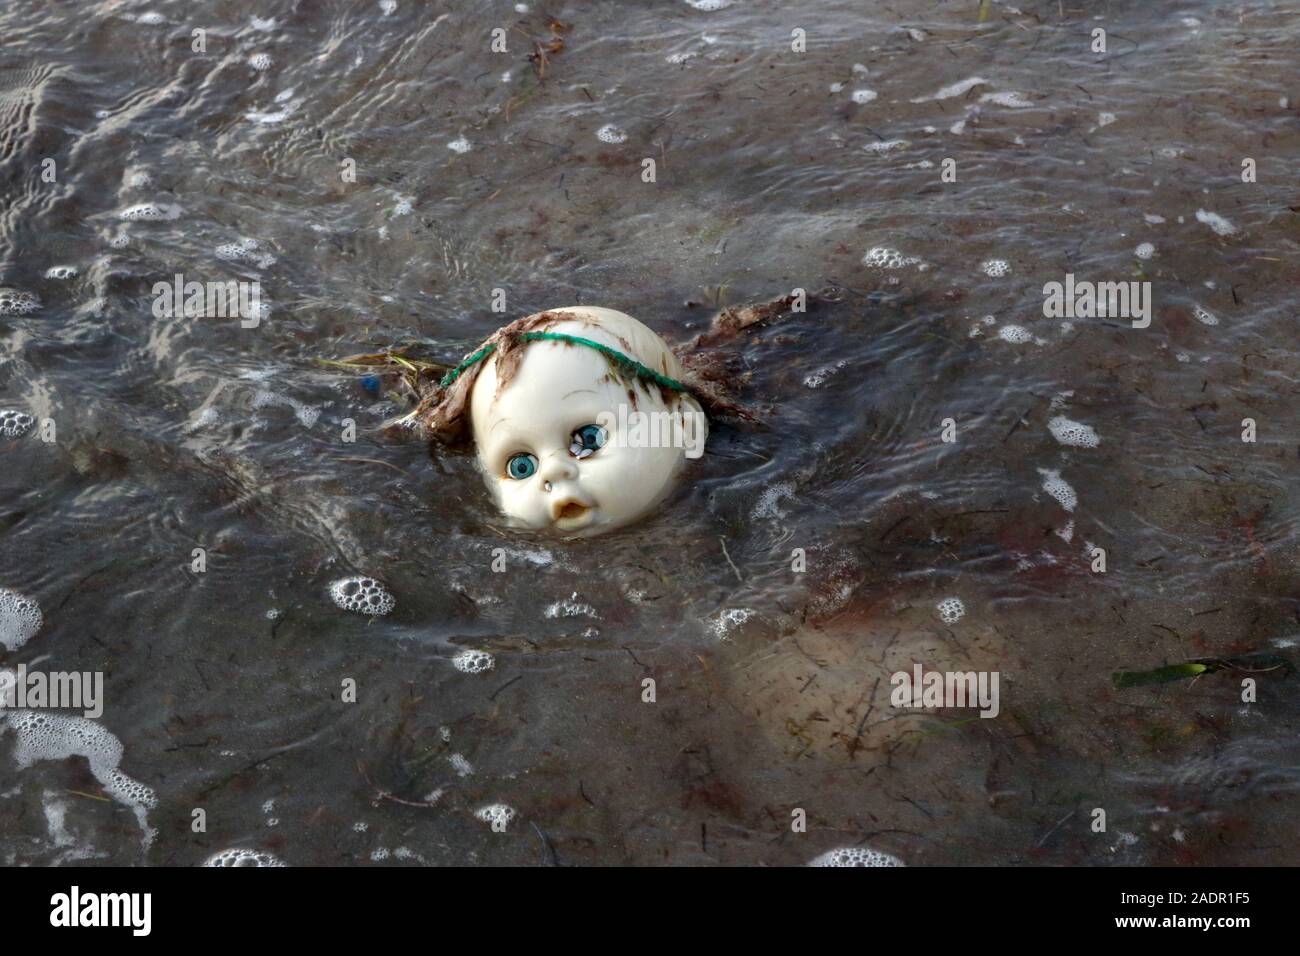 Washed up doll drowning in polluted ocean Stock Photo